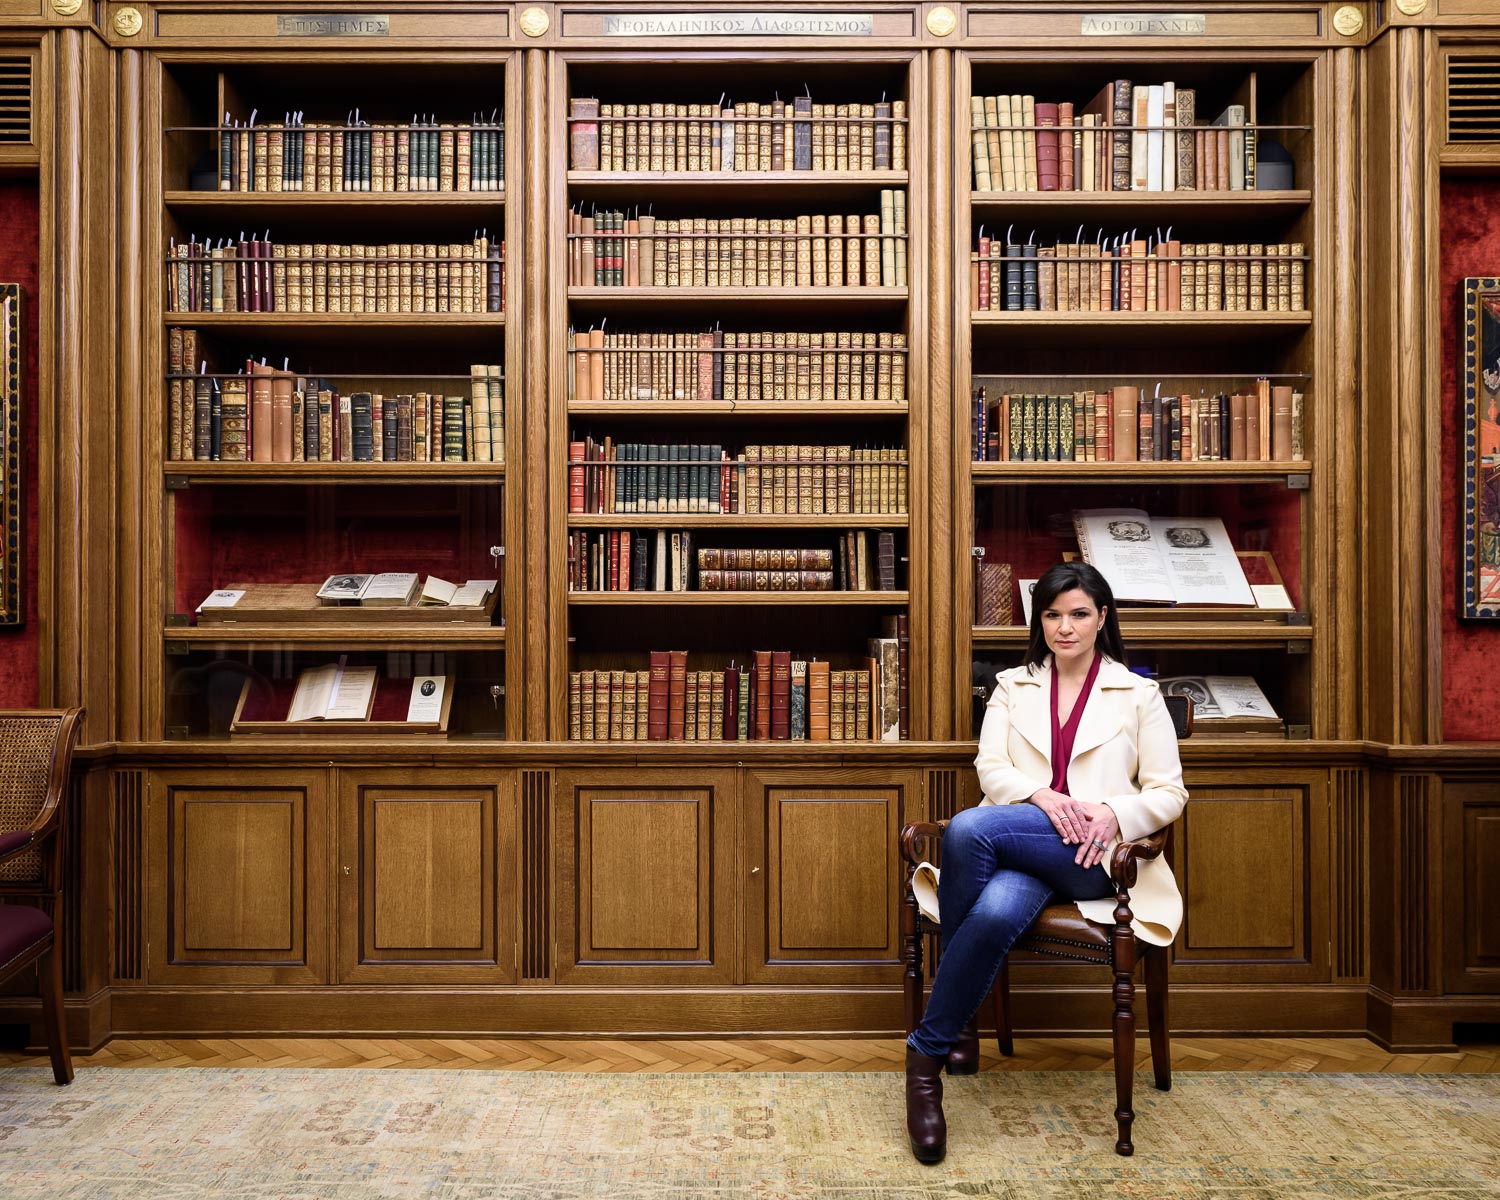  Aphrodite Panagiotakou, Vice-Director of the Onassis Cultural Center in the Hellenic Library 